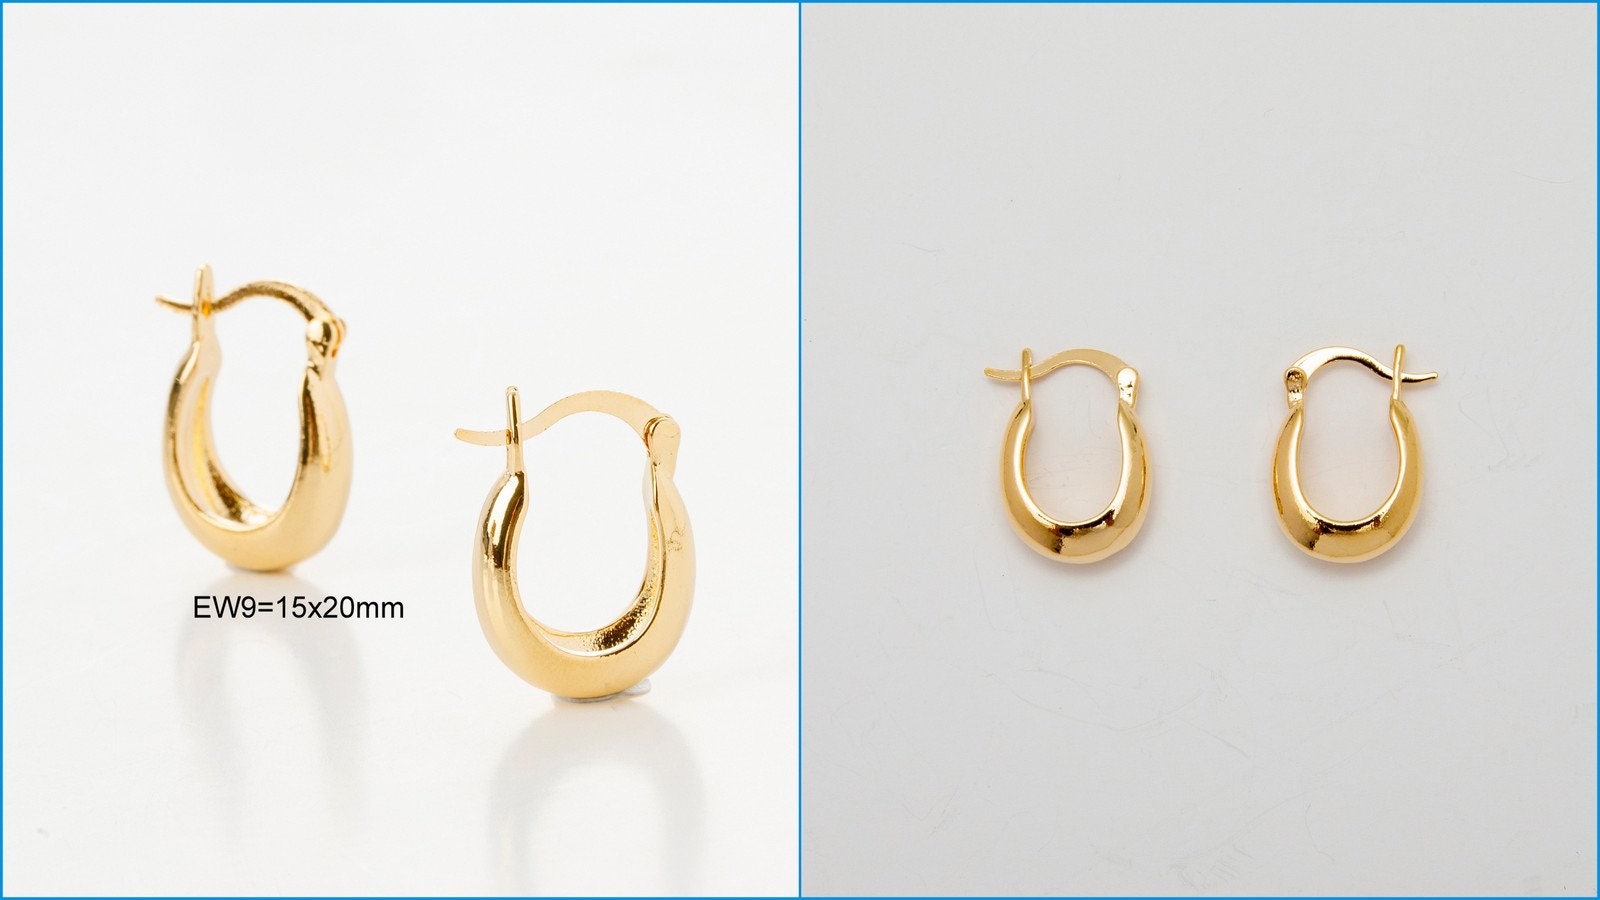 Rectangle Round Oval Hoop Earring Gold Filled EP 18K , Jewelry Making 6 designs Hoop Earrings Big and Light Weight